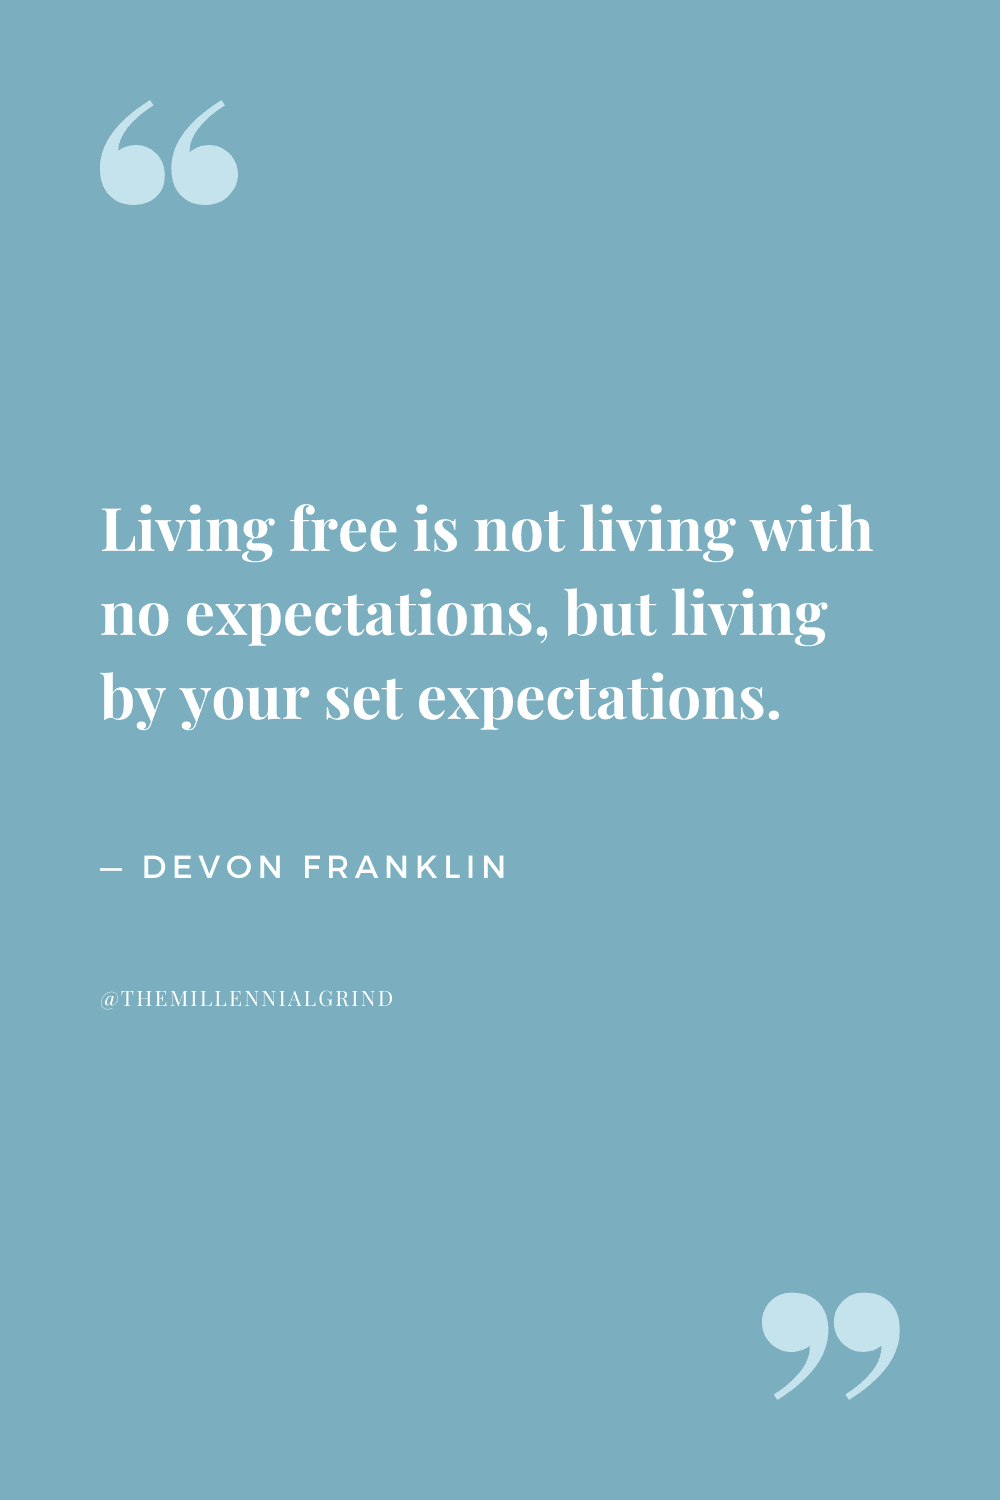 Quotes from Live Free by DeVon Franklin